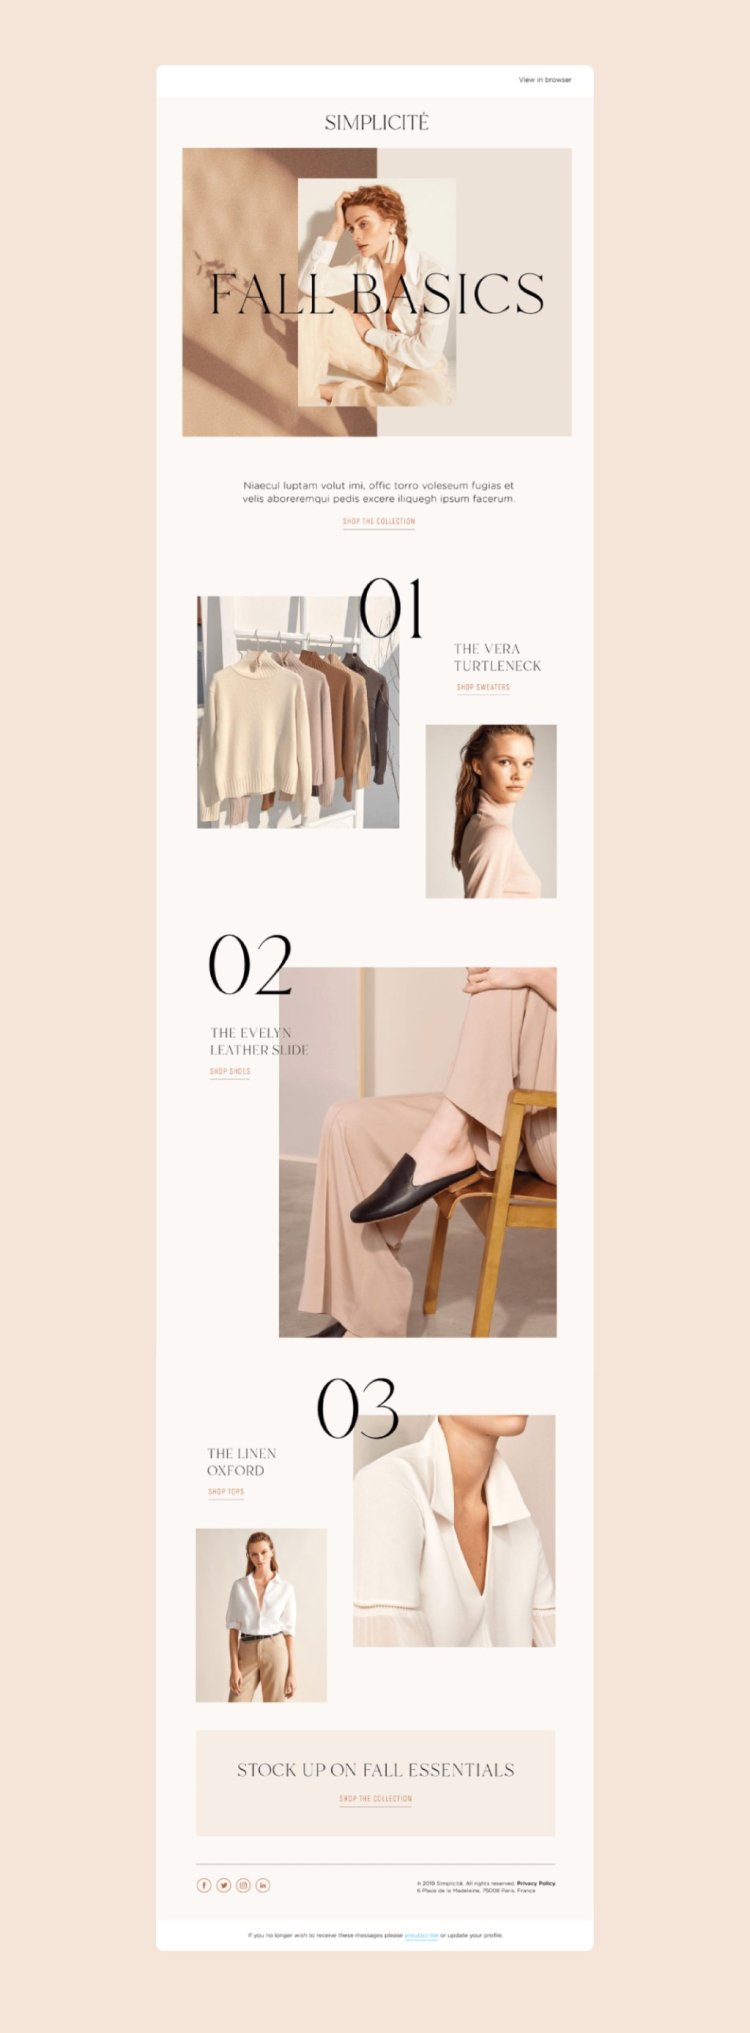 Email Design Inspiration by Knix